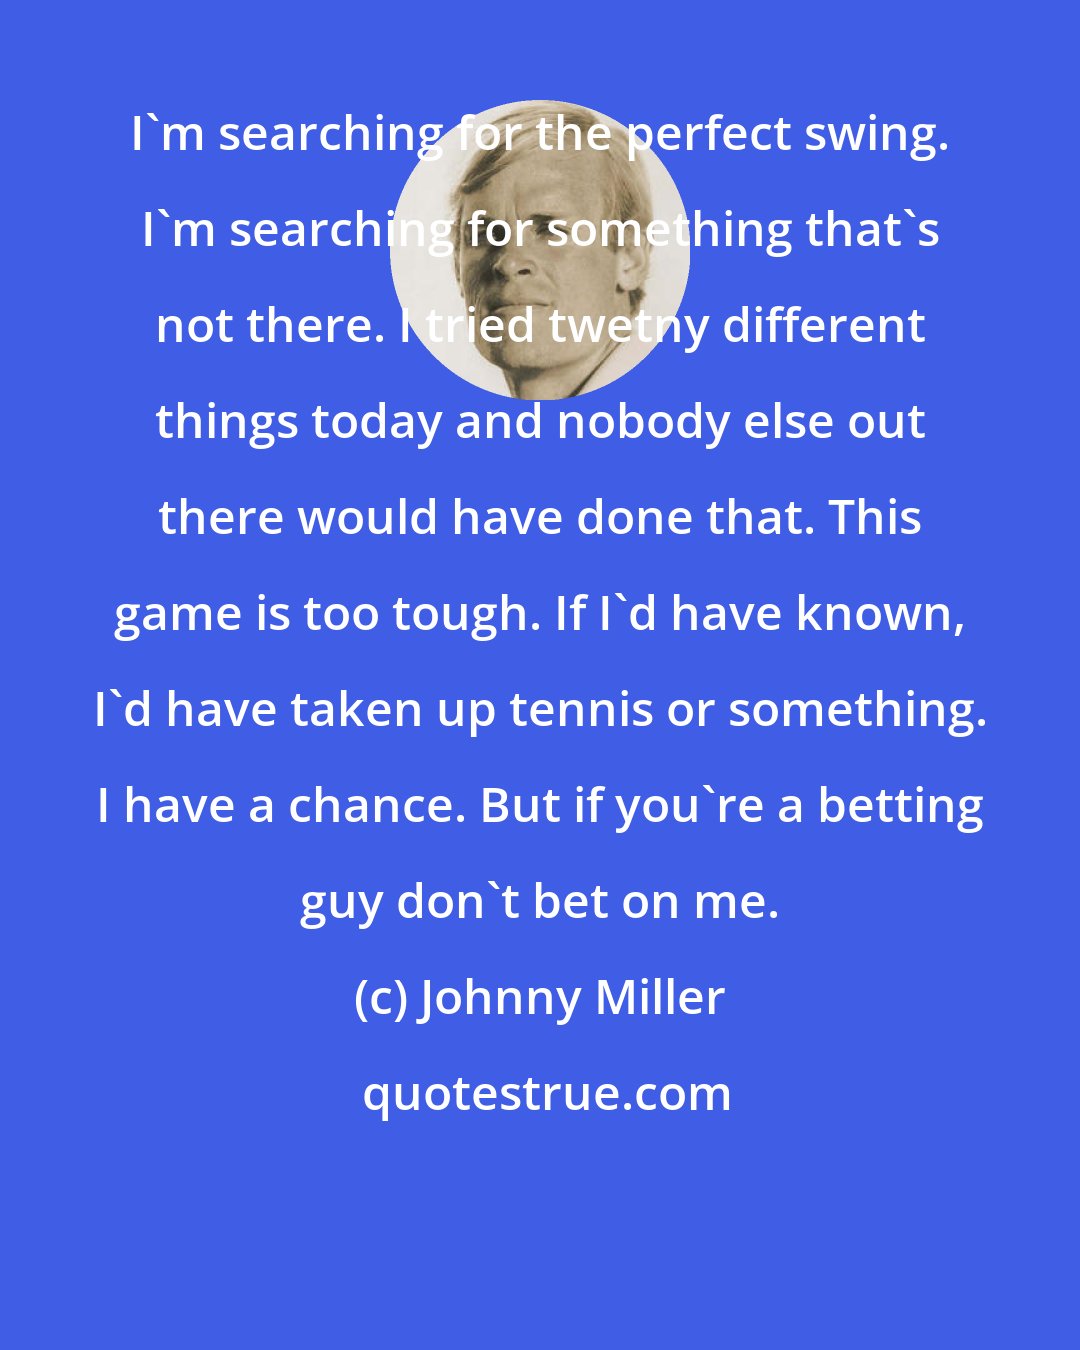 Johnny Miller: I'm searching for the perfect swing. I'm searching for something that's not there. I tried twetny different things today and nobody else out there would have done that. This game is too tough. If I'd have known, I'd have taken up tennis or something. I have a chance. But if you're a betting guy don't bet on me.